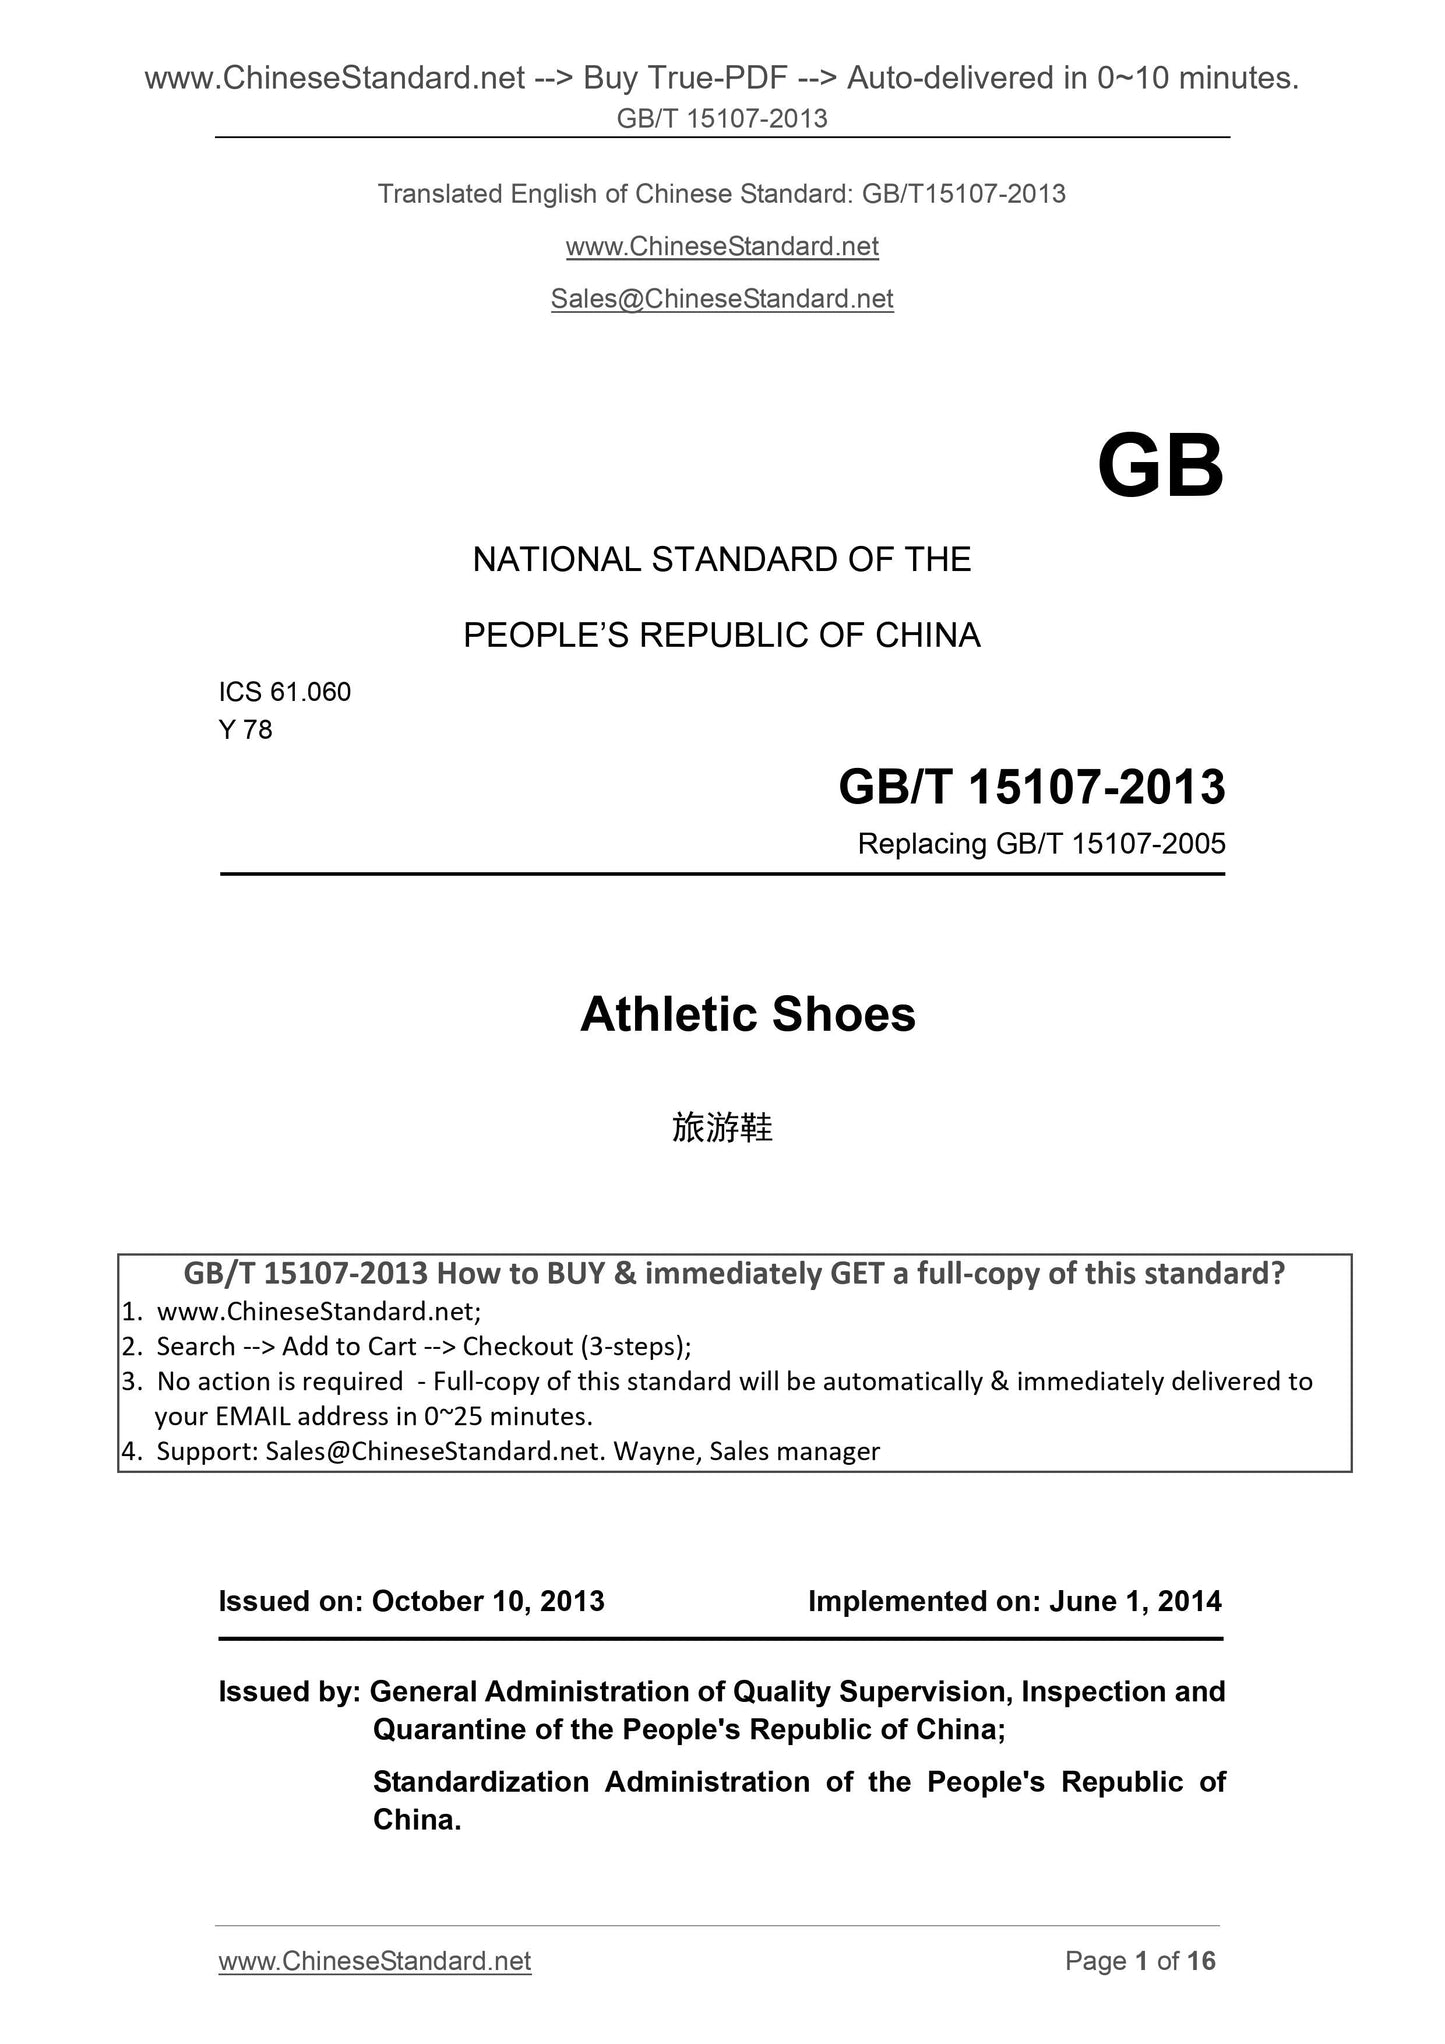 GB/T 15107-2013 Page 1